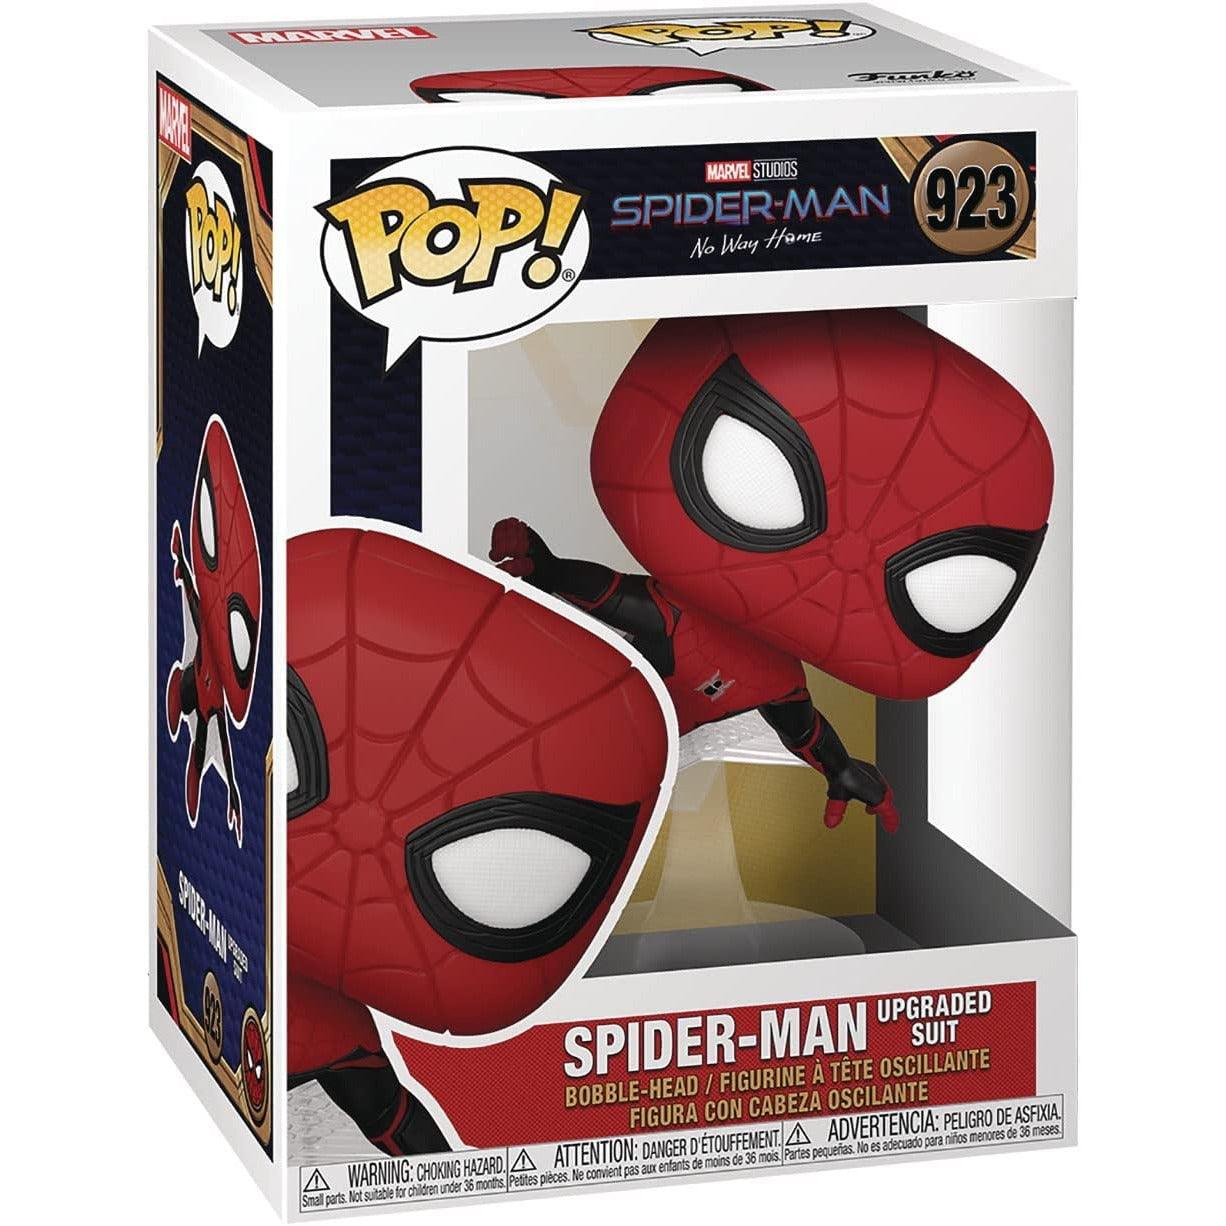 Funko Spider-Man Upgraded Suit - Spider-Man No Way Home - BumbleToys - 18+, Action Figures, Avengers, Boys, Characters, Funko, Pre-Order, Spider man, Spider-Man No Way Home, Spiderman